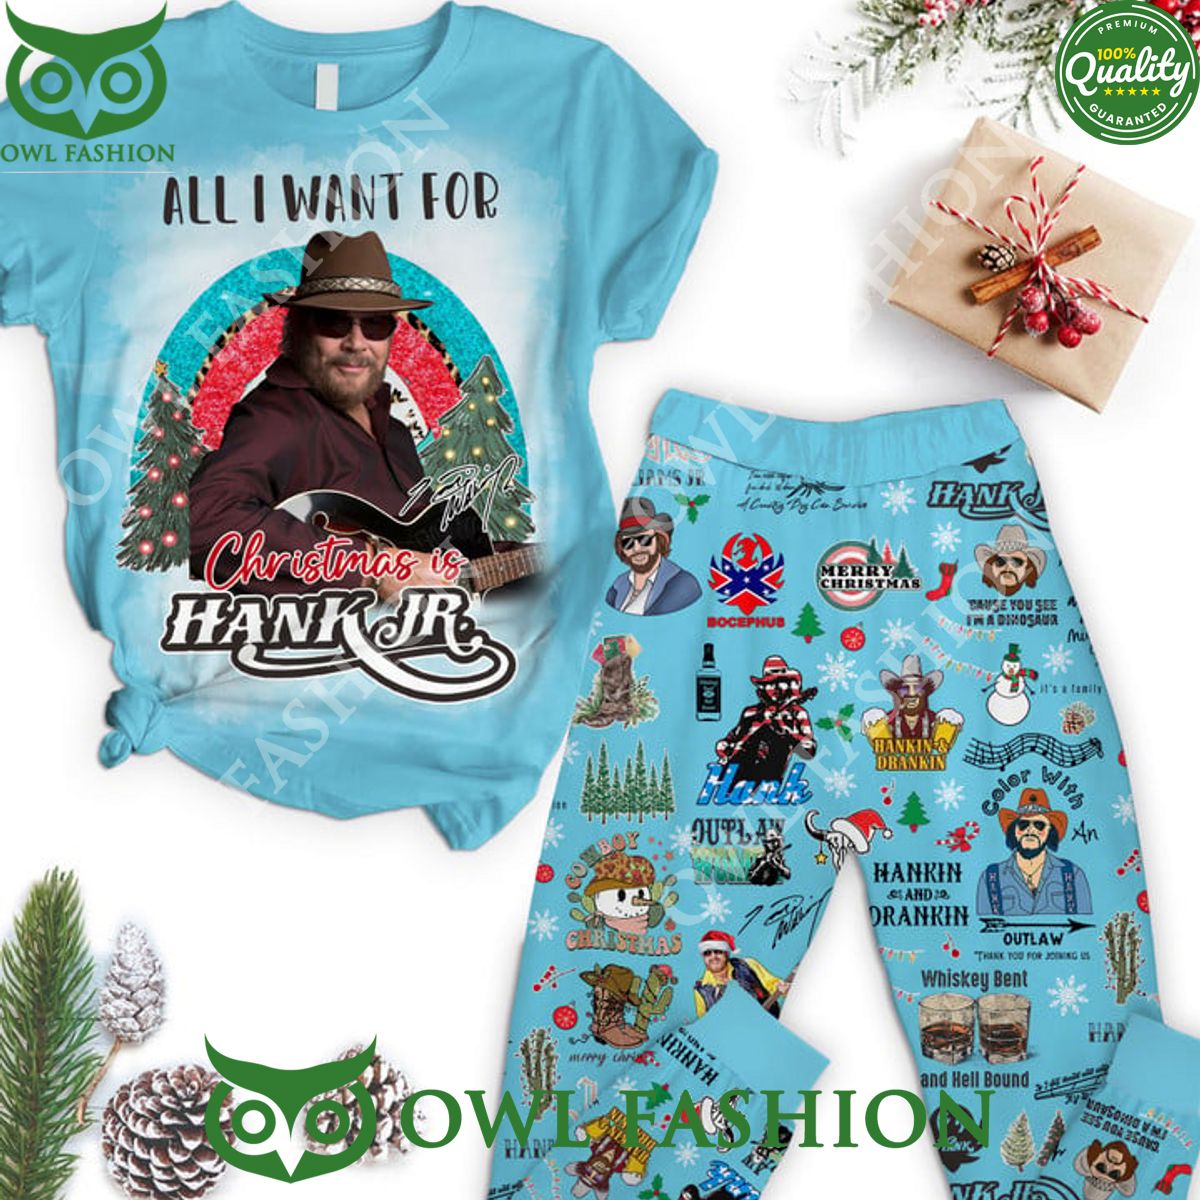 Hank Williams Jr. Christmas Pajamas Set All I want for Beauty queen